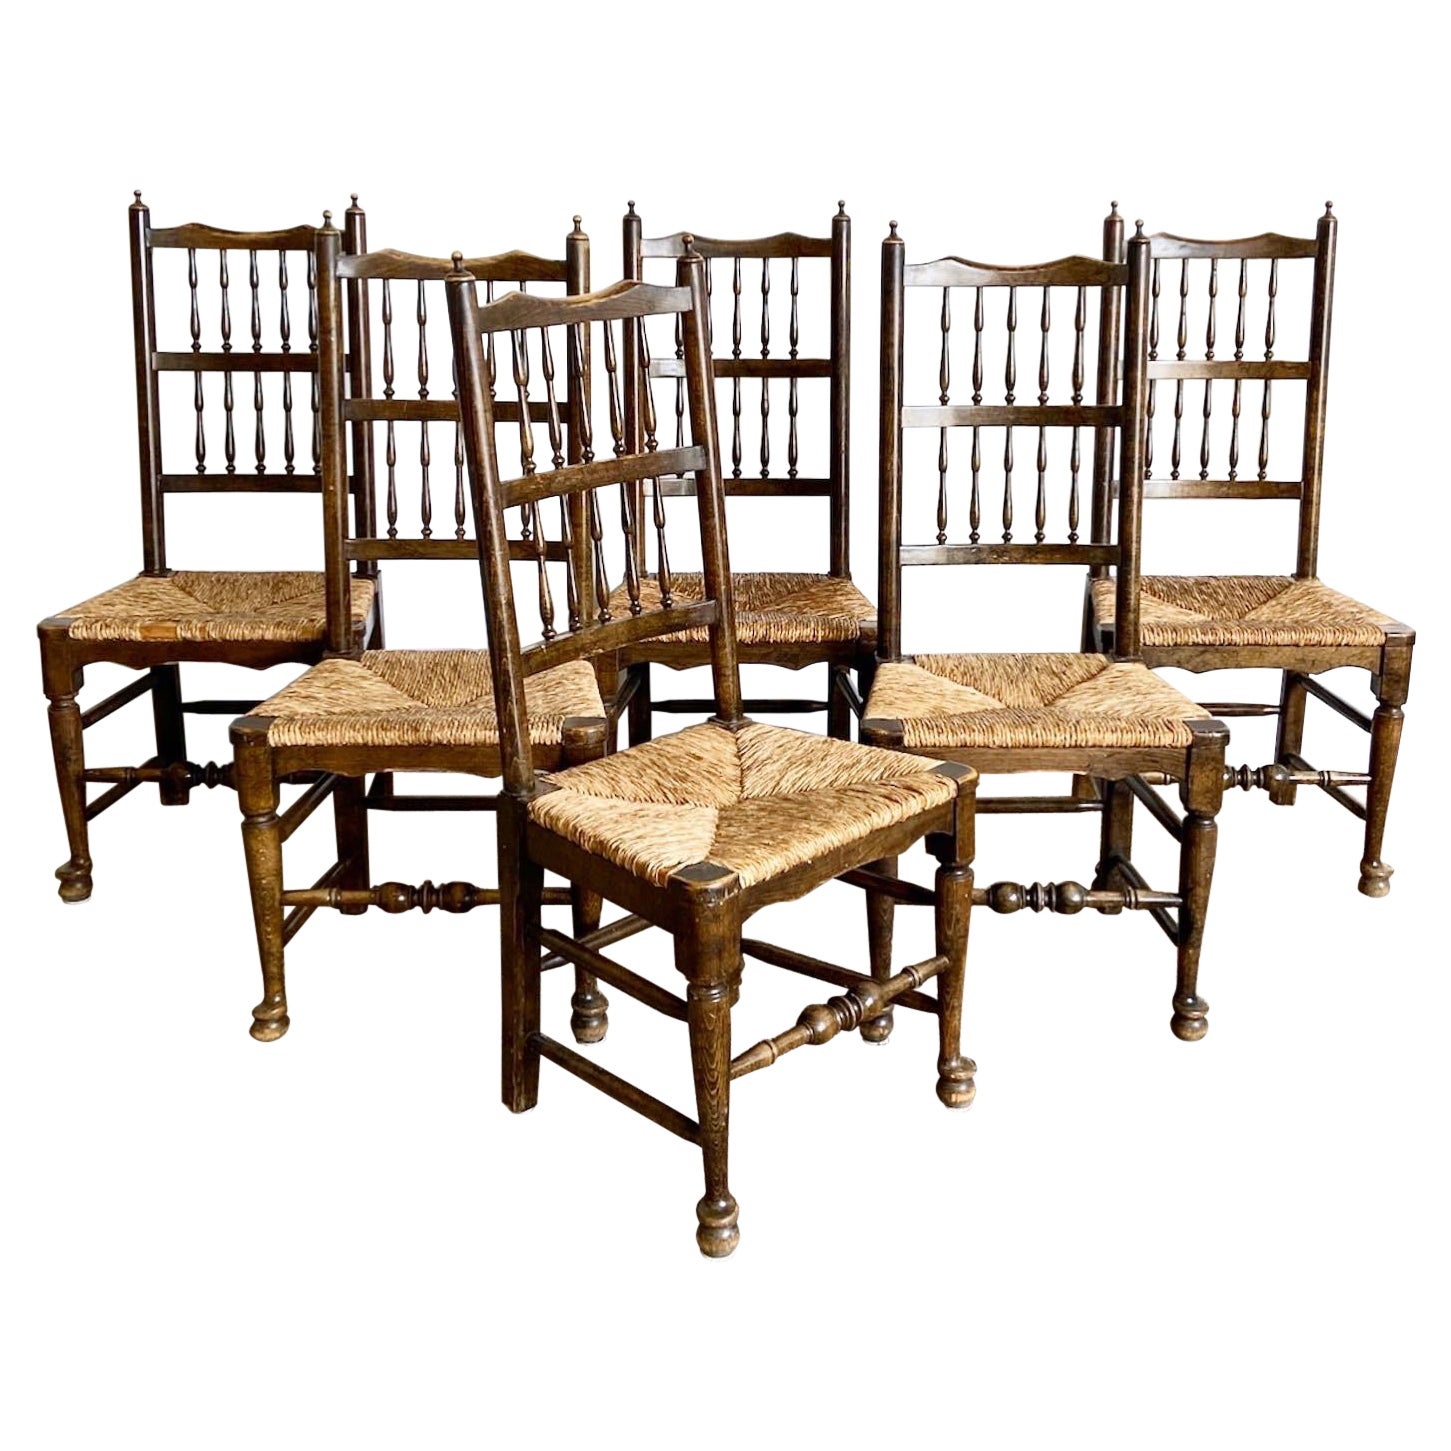 Farmhouse Spindle Back Rush Seat Wooden Dining Chairs - Set of 6